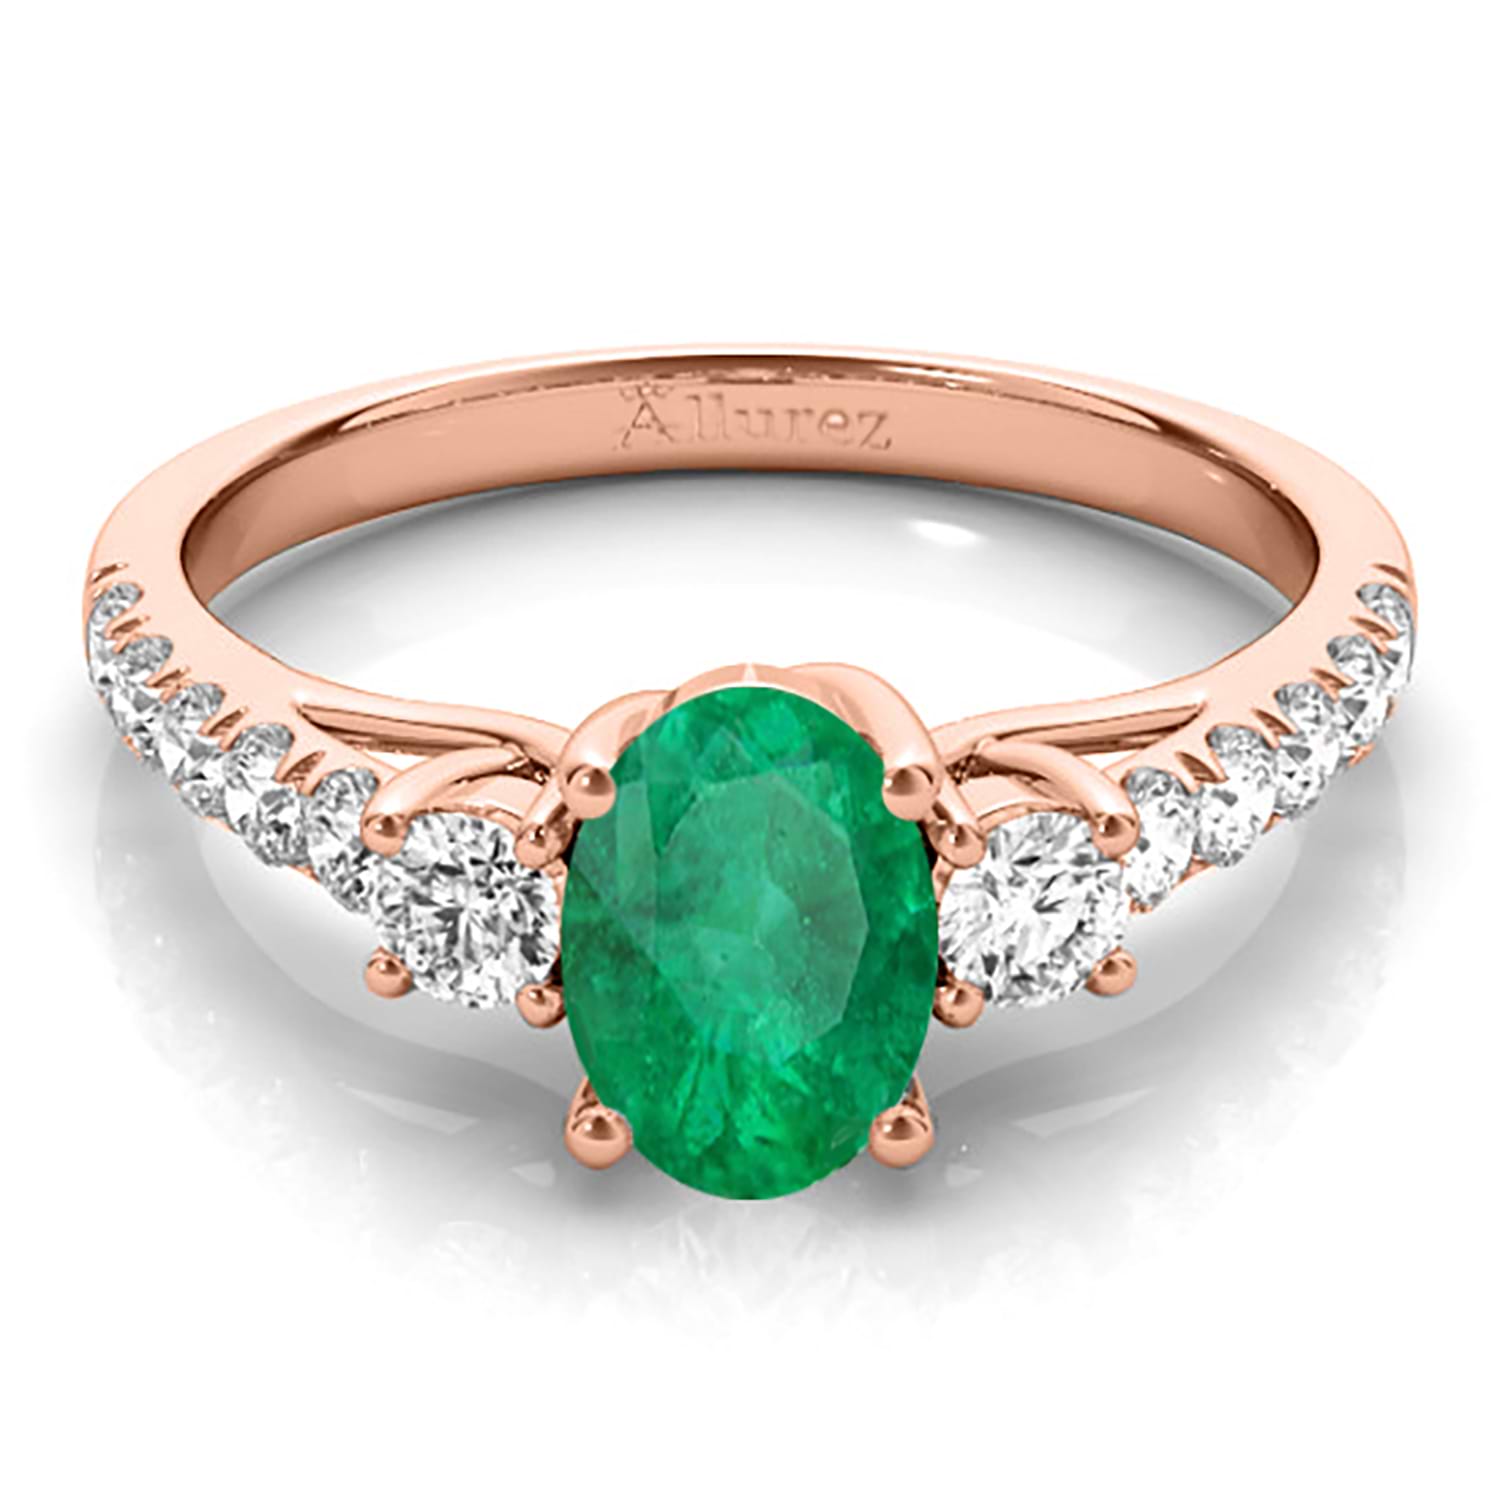 Oval Cut Emerald & Diamond Engagement Ring 14k Rose Gold (1.40ct)